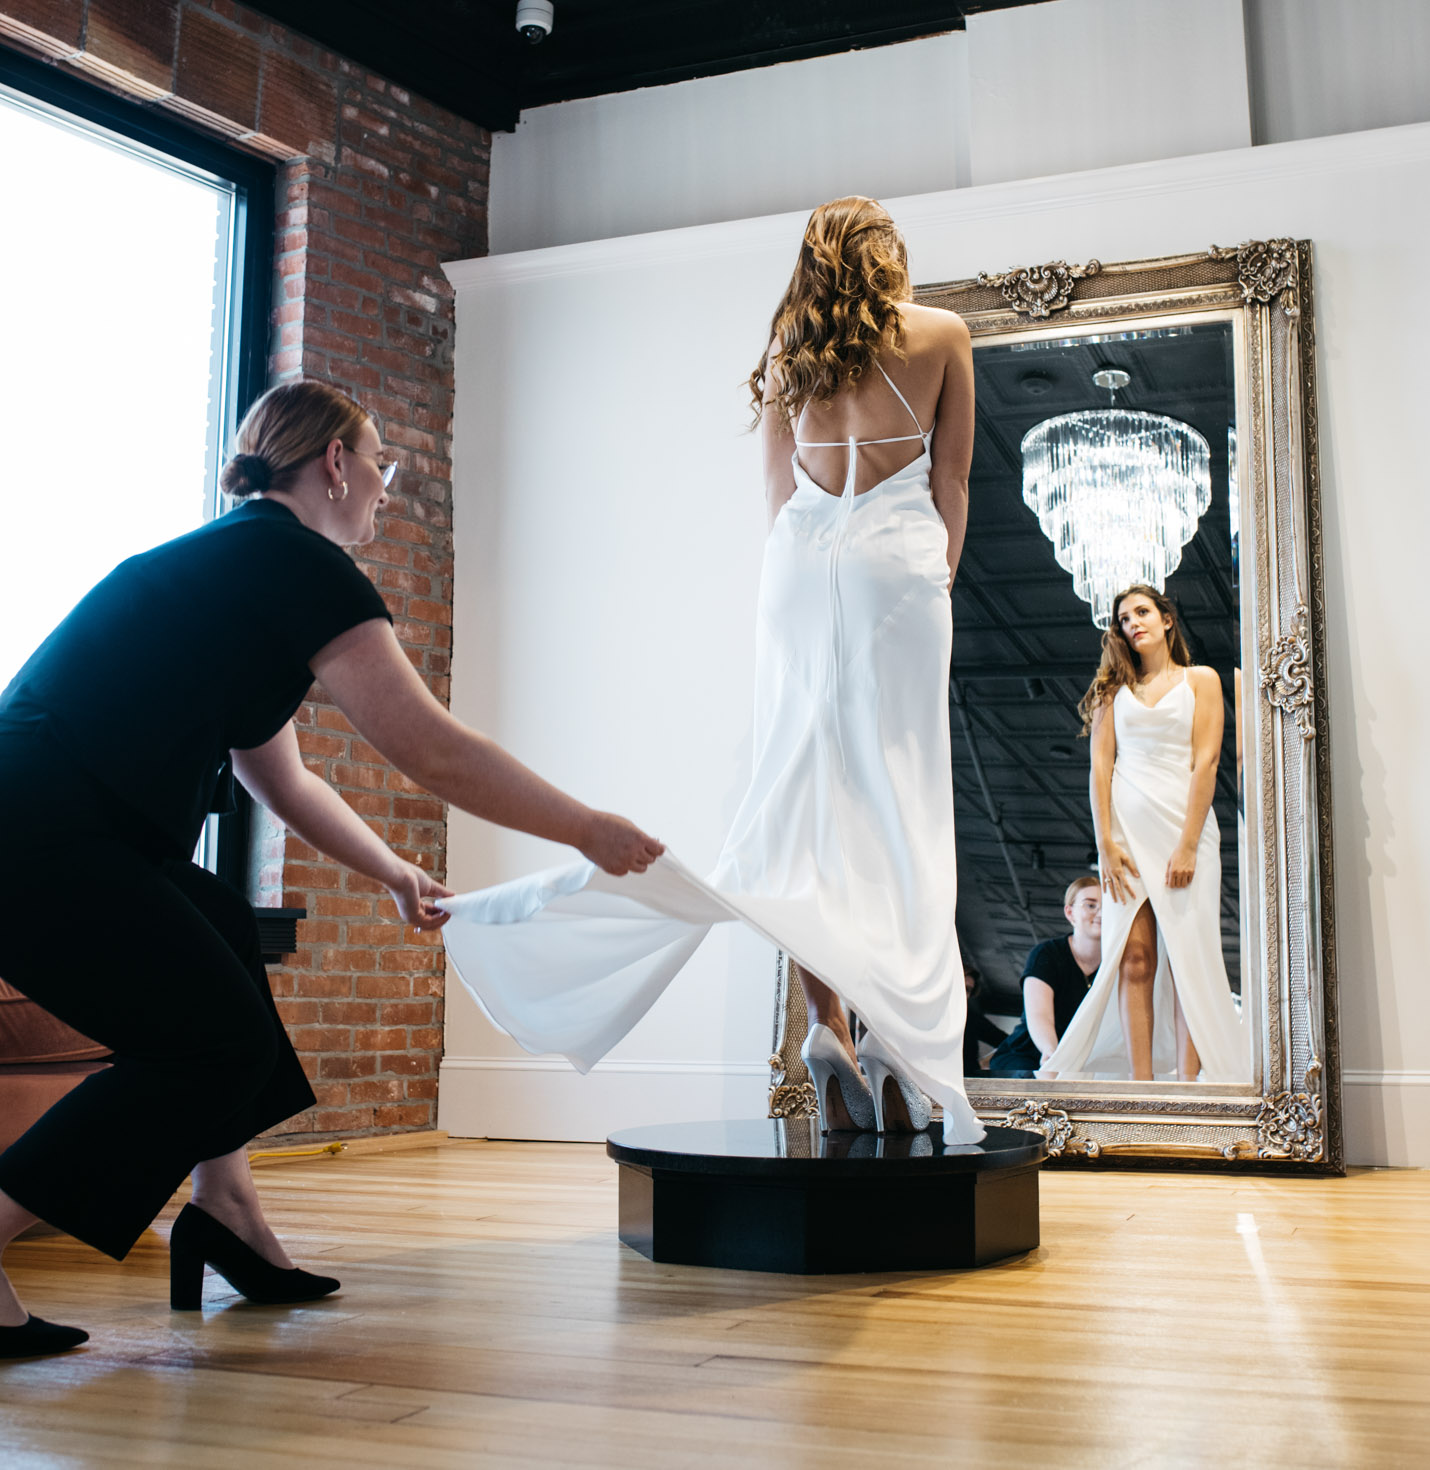 A bride trying on a dress.